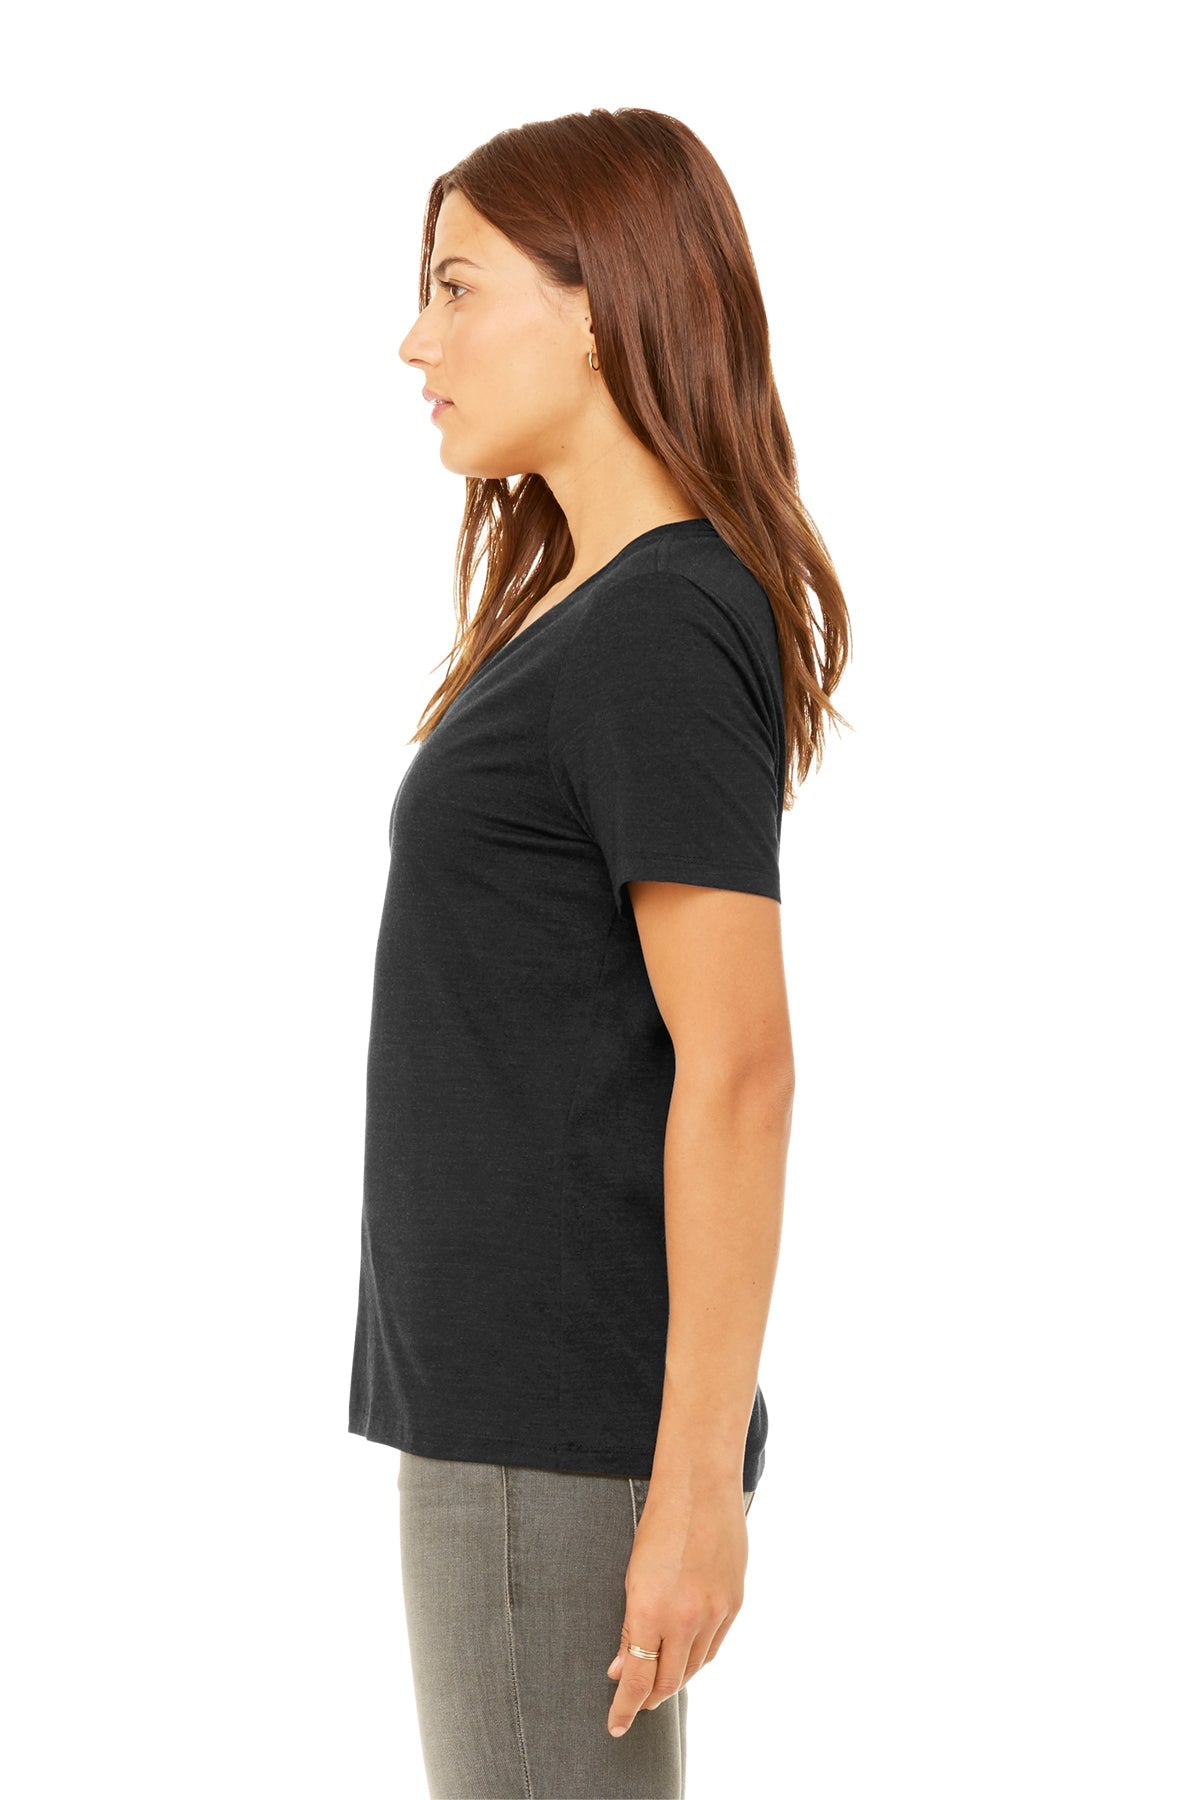 Bella Canvas Womens Relaxed Heather V-Neck, Black